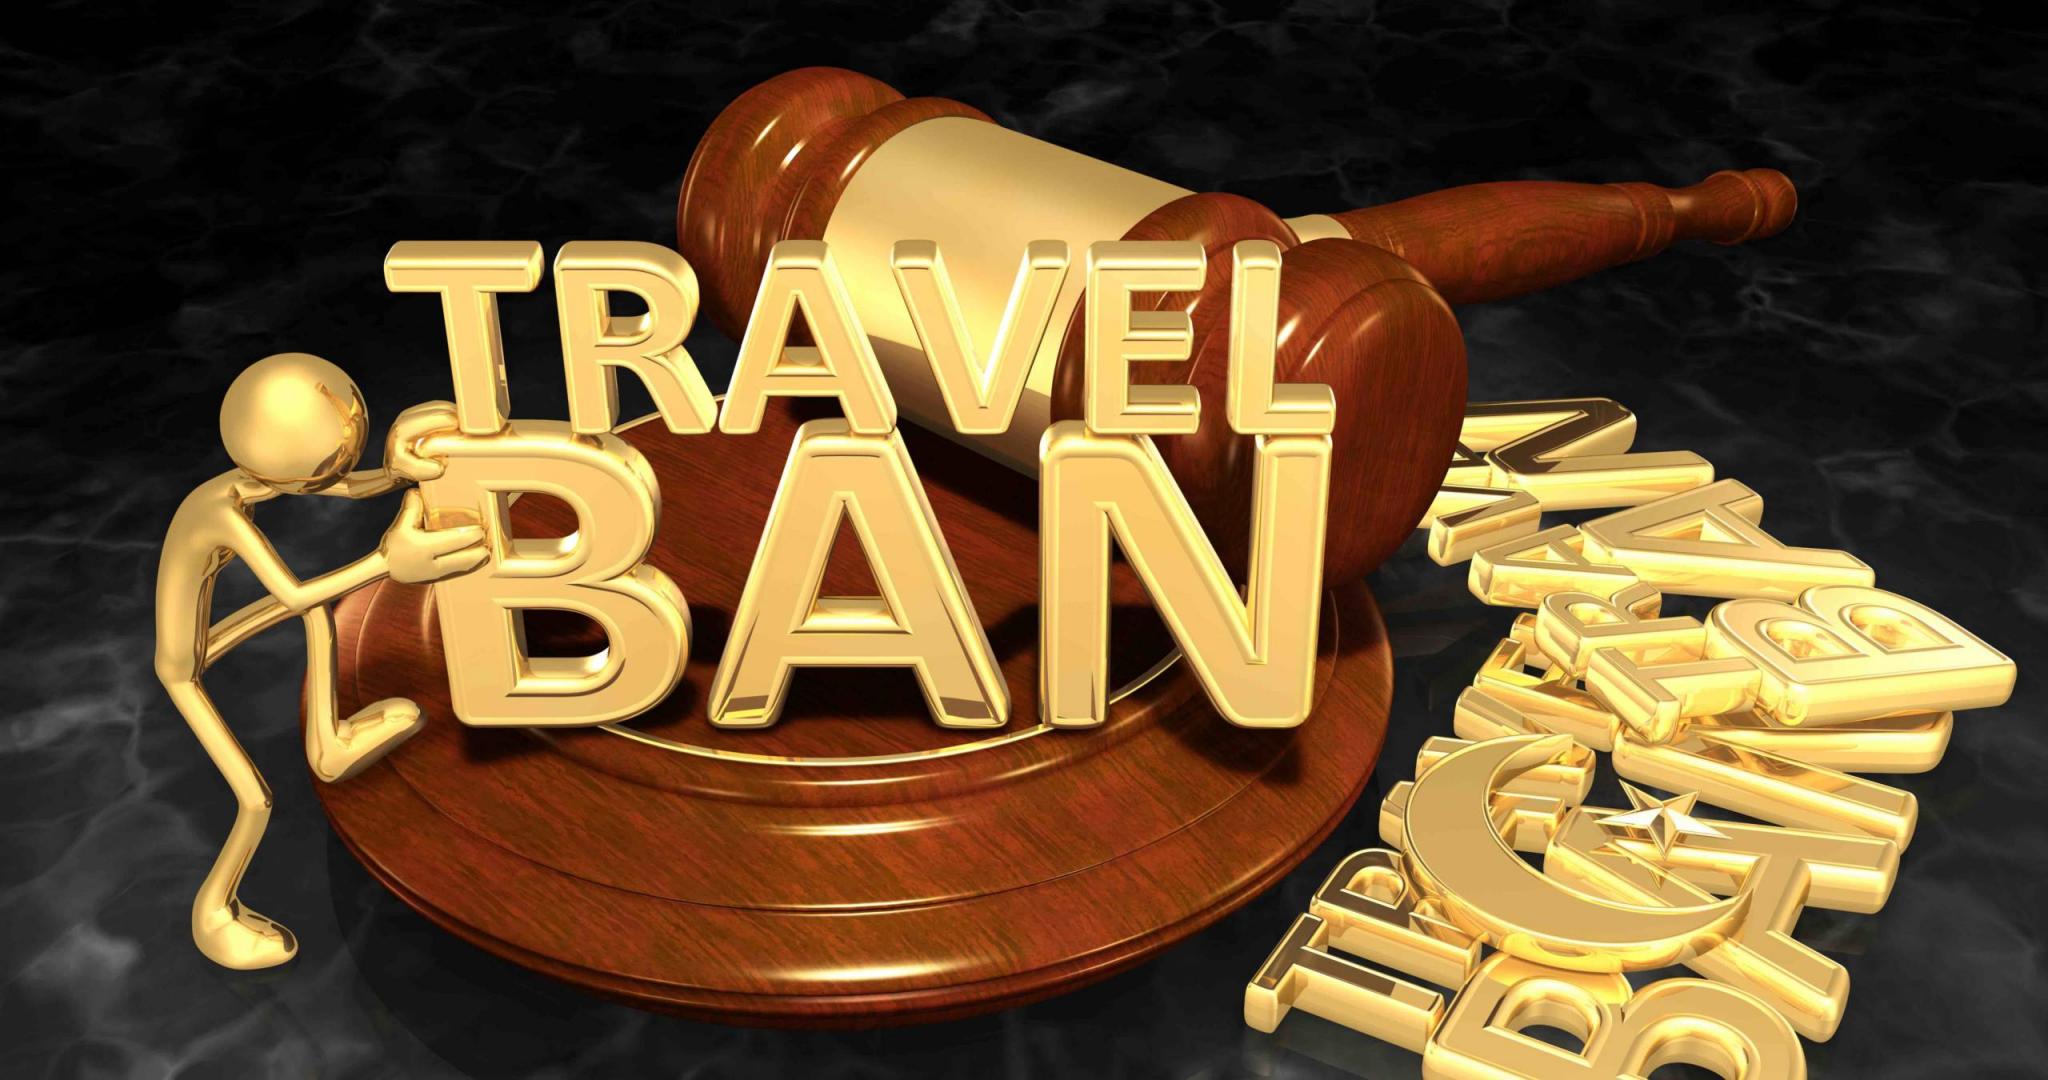 travel ban meaning